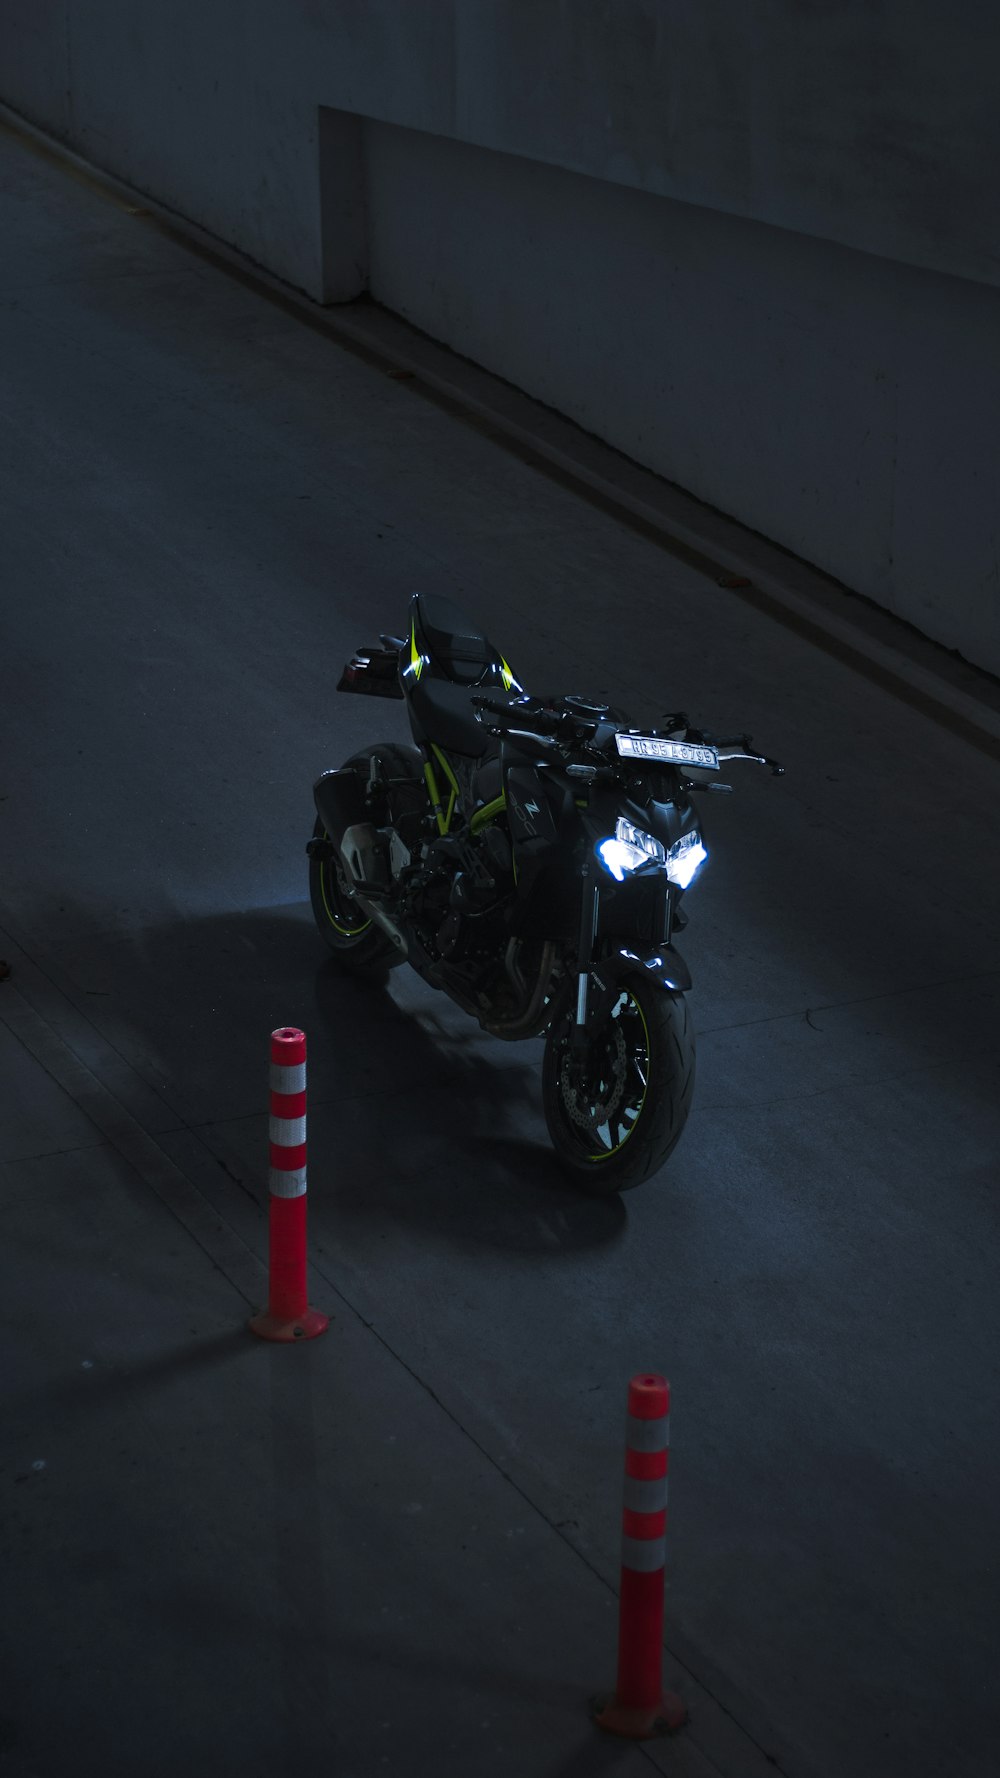 a motorcycle parked in a parking lot at night